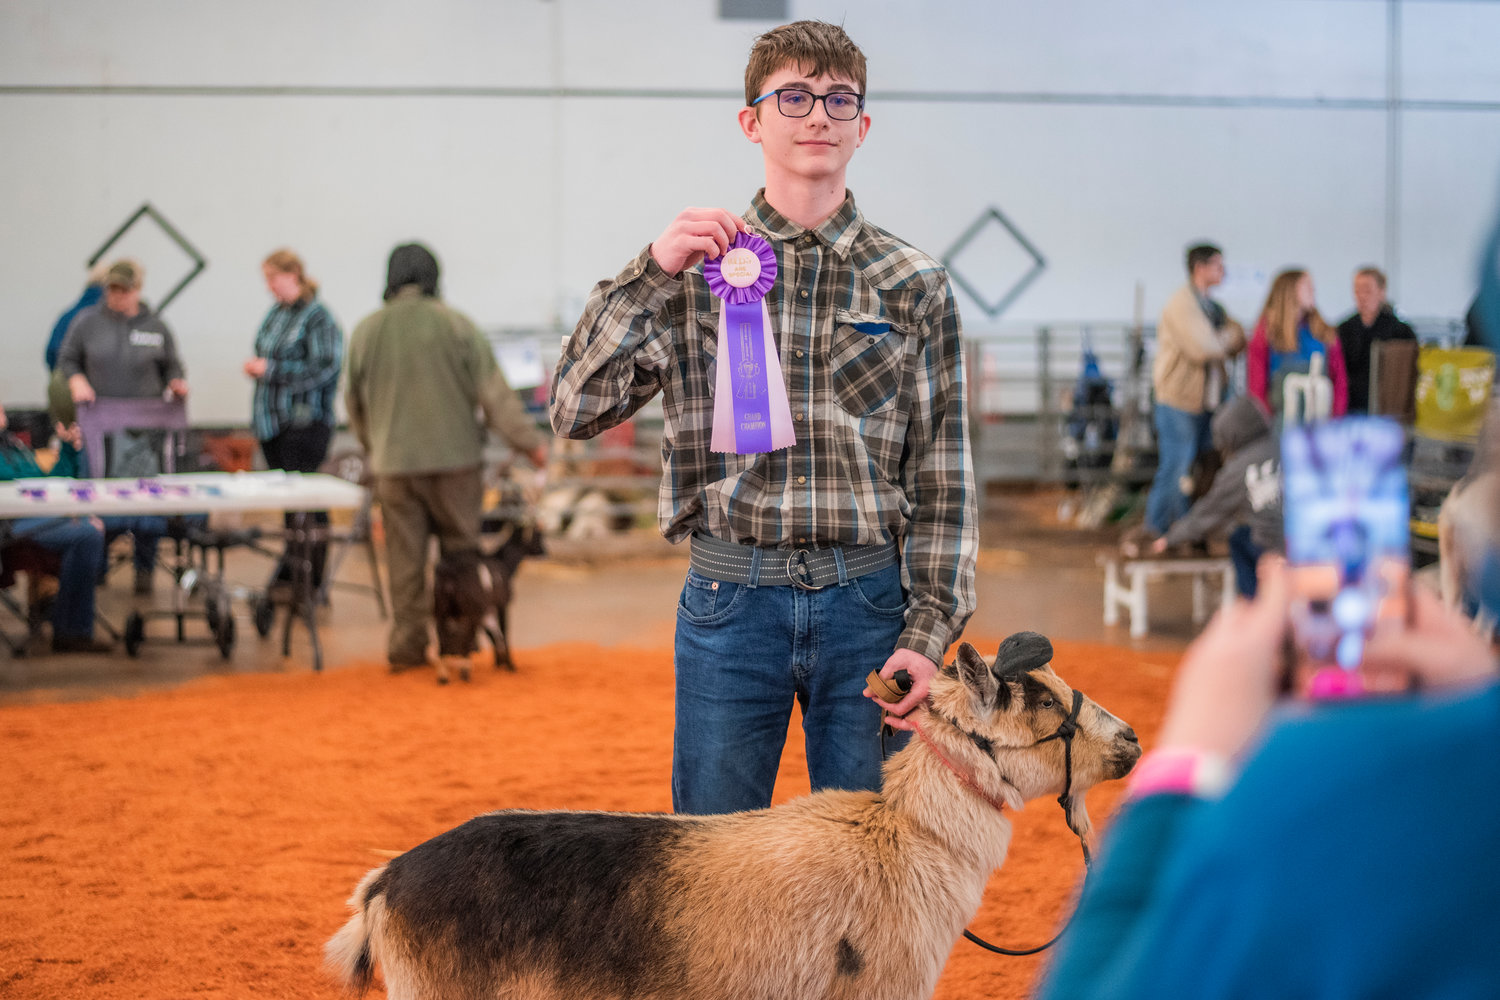 Will Allen, 14, poses for a photo while holding up his Grand Champion ribbon alongside his Nigerian Dwarf goat named Oreo on Saturday during the Spring Youth Fair in Centralia.